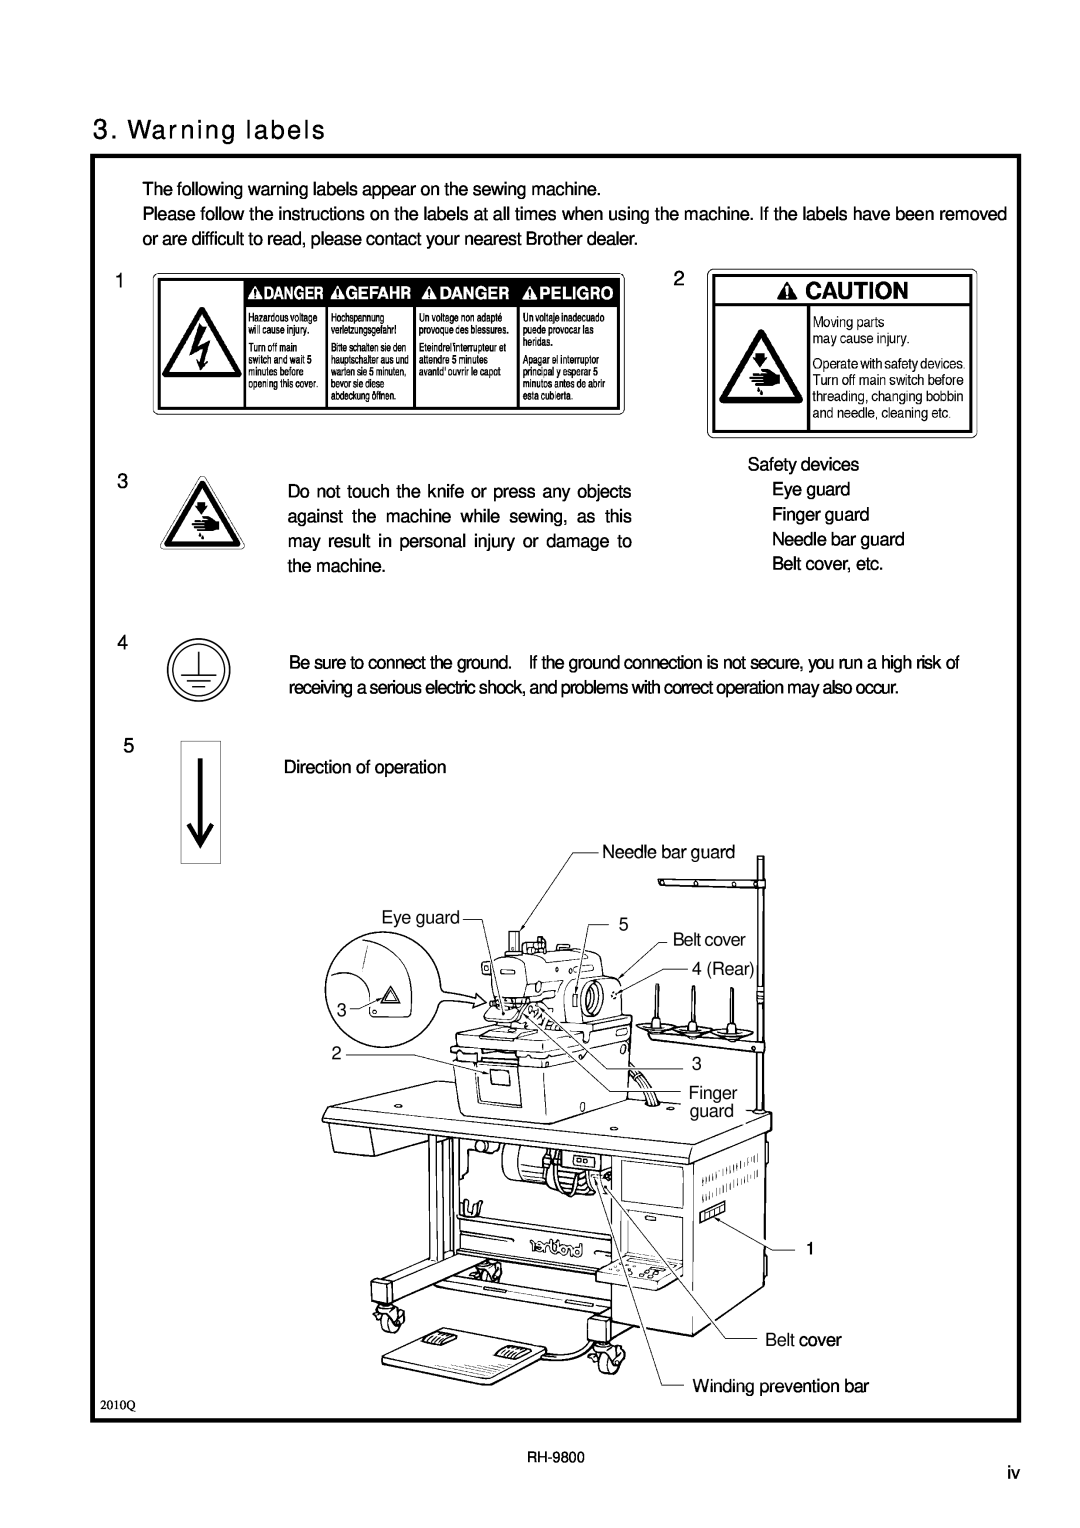 Brother DH4-B980 instruction manual Warning labels 